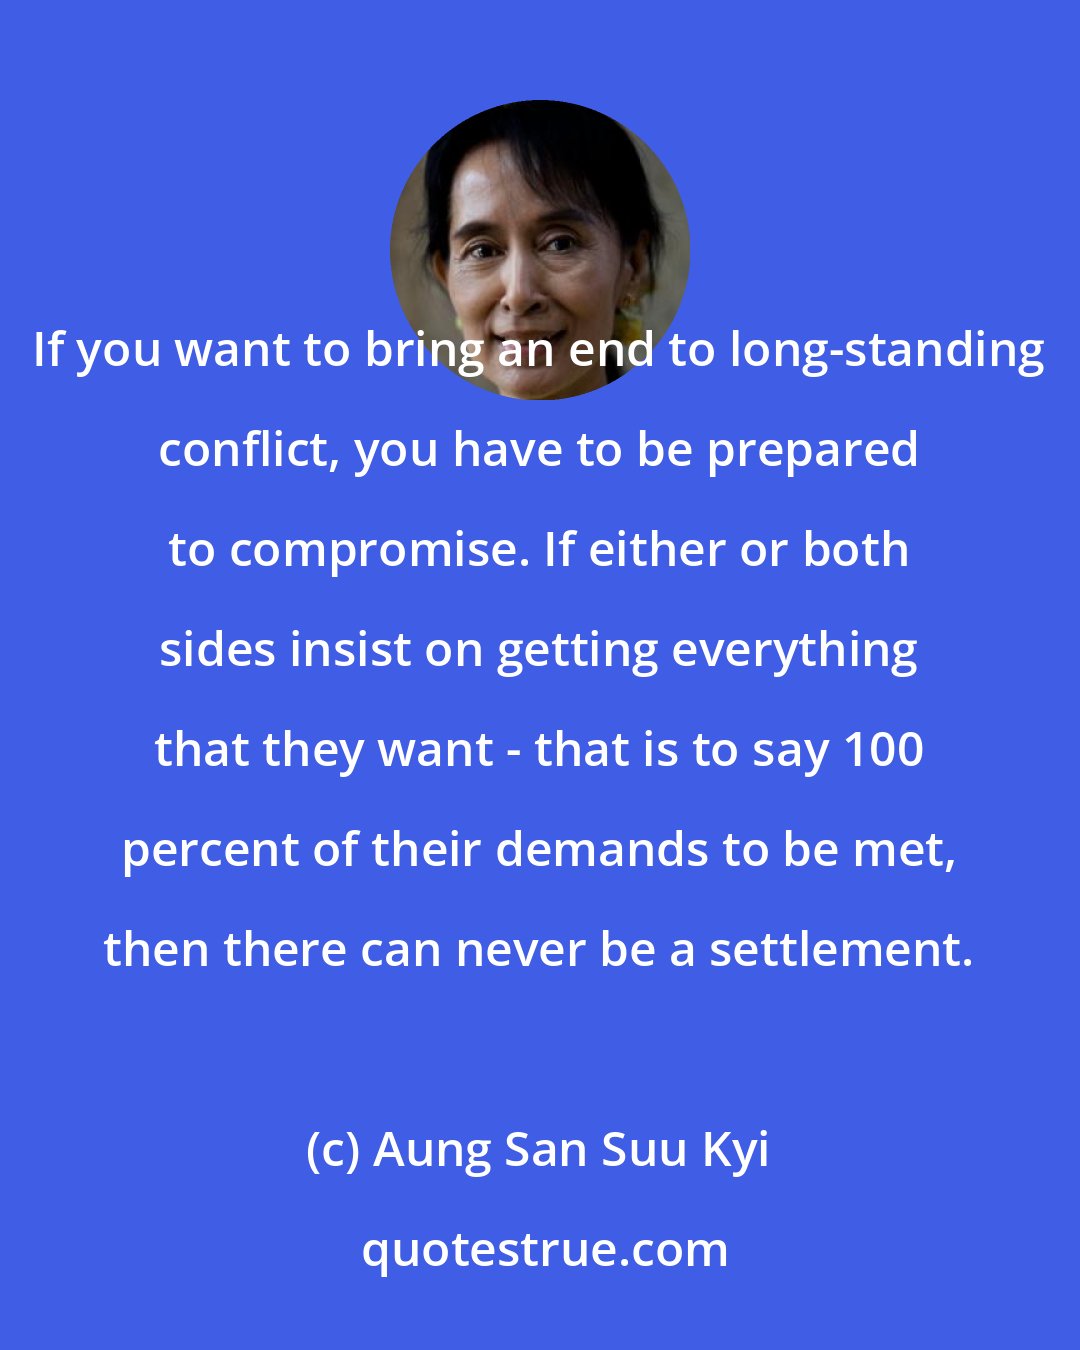 Aung San Suu Kyi: If you want to bring an end to long-standing conflict, you have to be prepared to compromise. If either or both sides insist on getting everything that they want - that is to say 100 percent of their demands to be met, then there can never be a settlement.